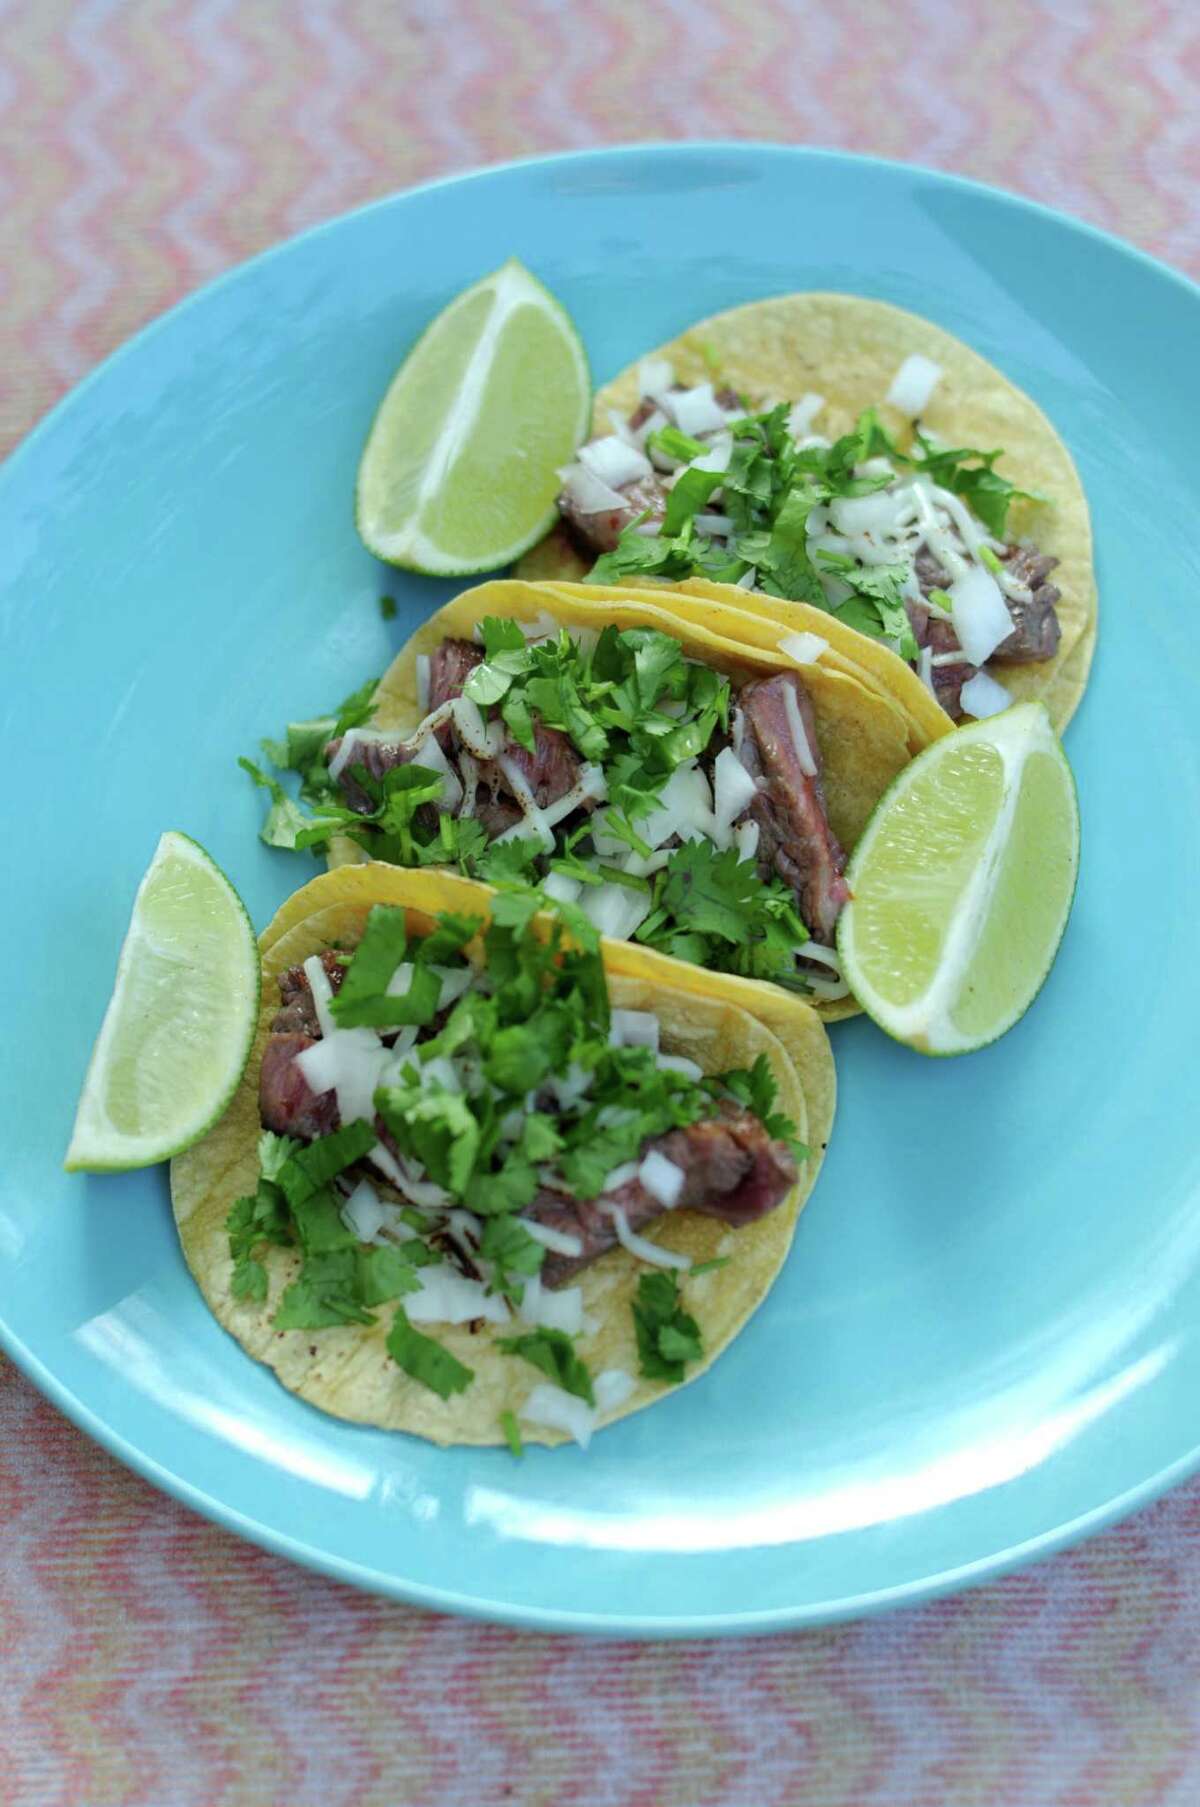 Chipotle- and Lime-Marinated Skirt Steak Street Tacos